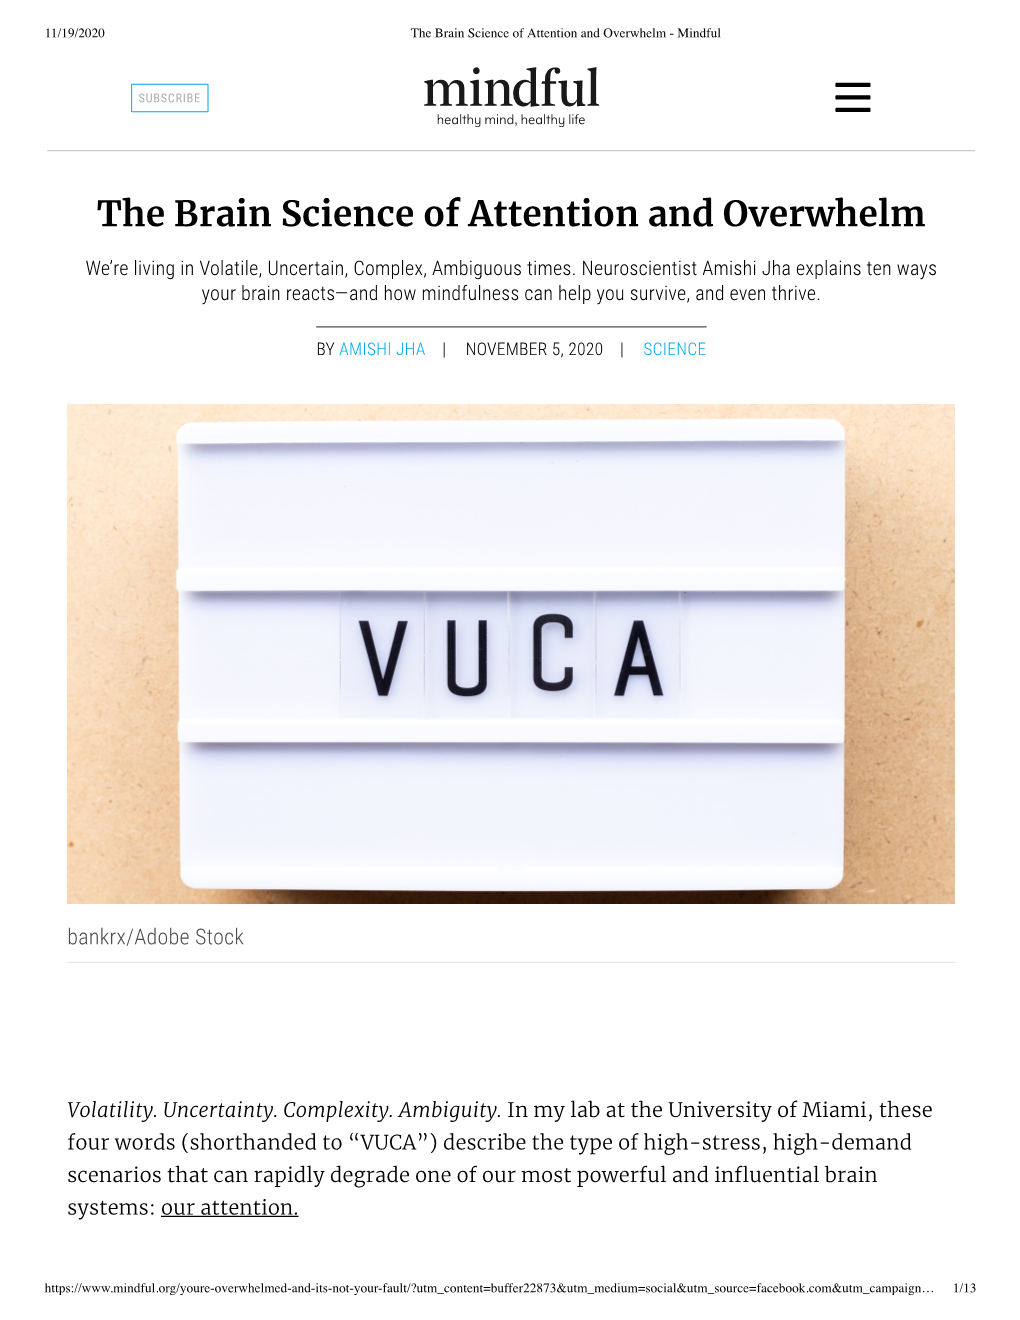 The Brain Science of Attention and Overwhelm - Mindful